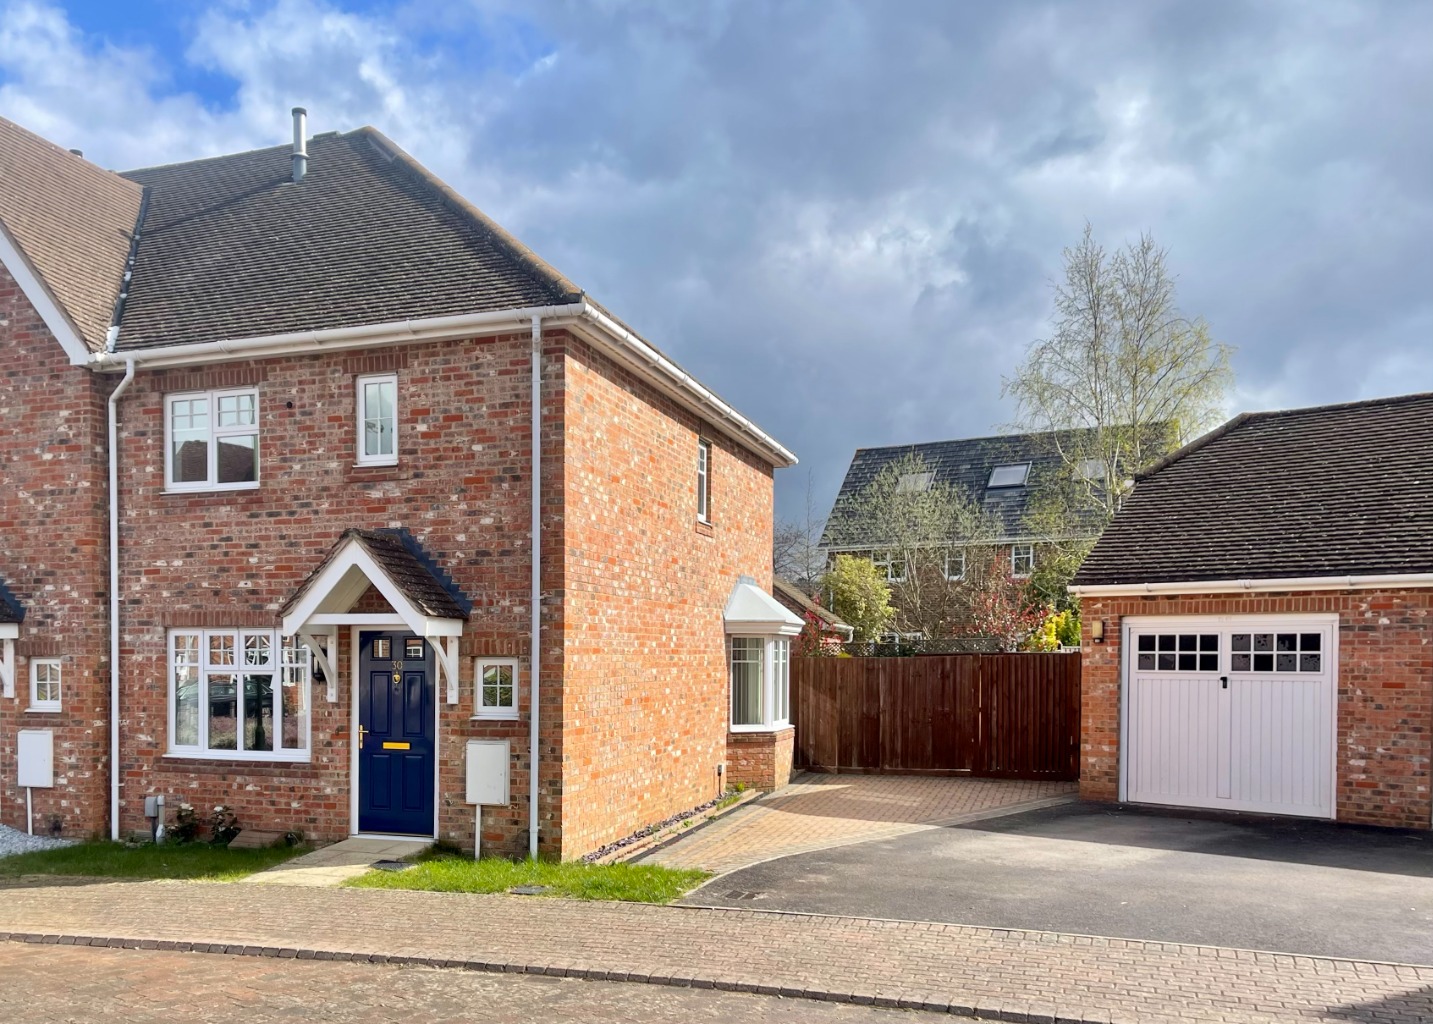 Offered with no onward chain! Located on the popular Elvetham Heath development is this well presented three bedroom family home set in the desirable Marrow Meade, being very close by to the nature reserve.